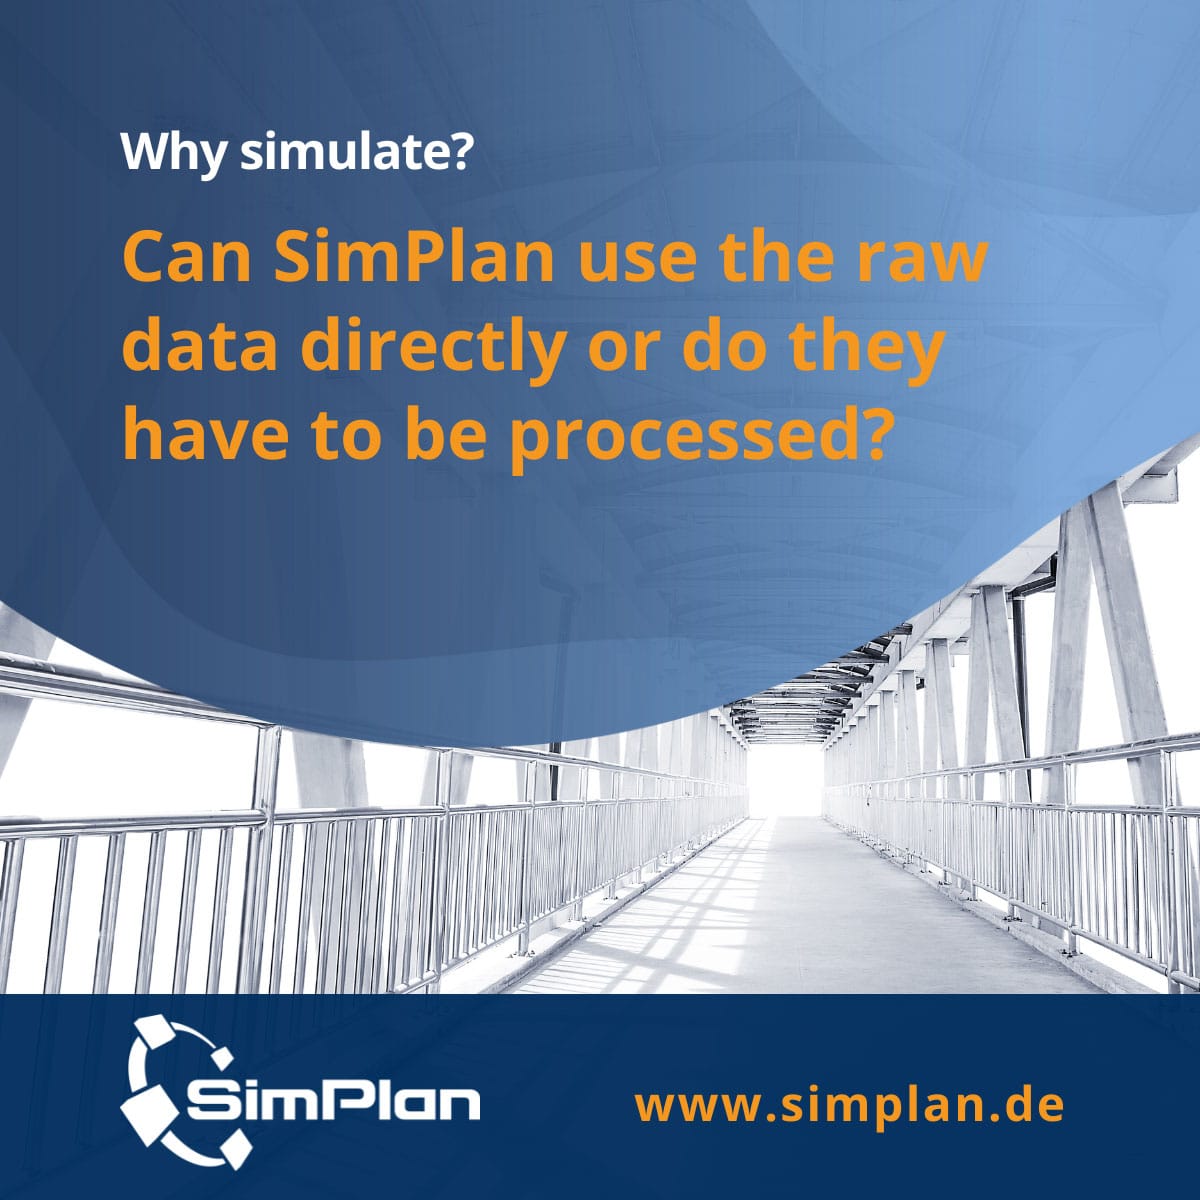 Why_simulate_12_can_simplan_use_data_directly